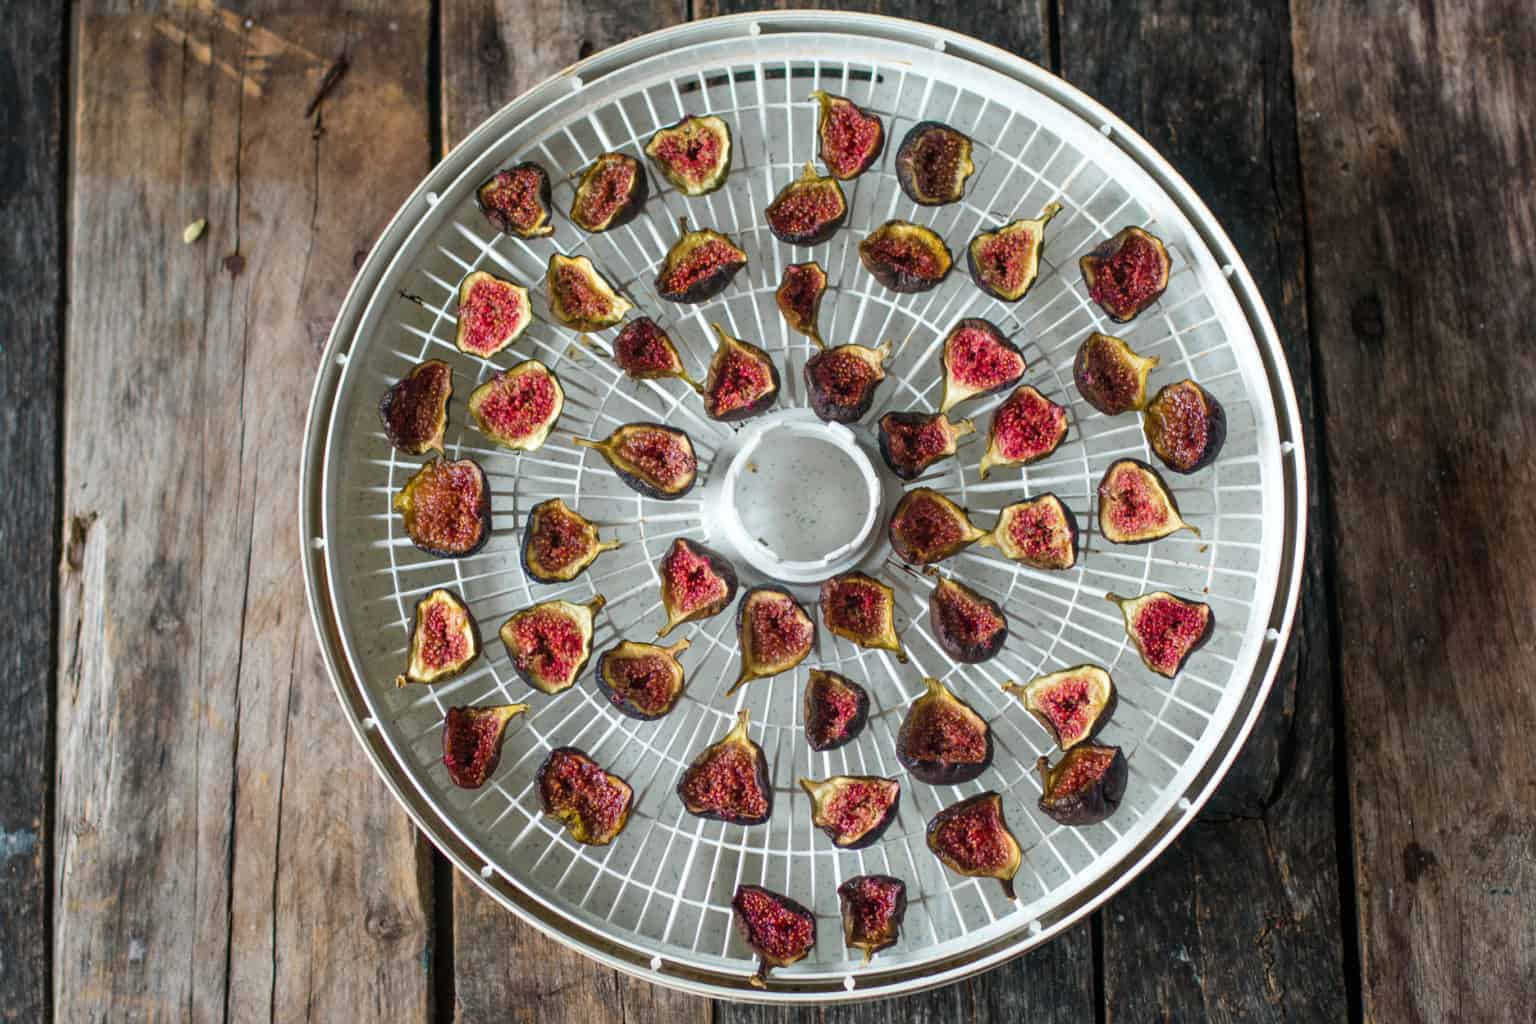 How To Dry Figs In A Dehydrator